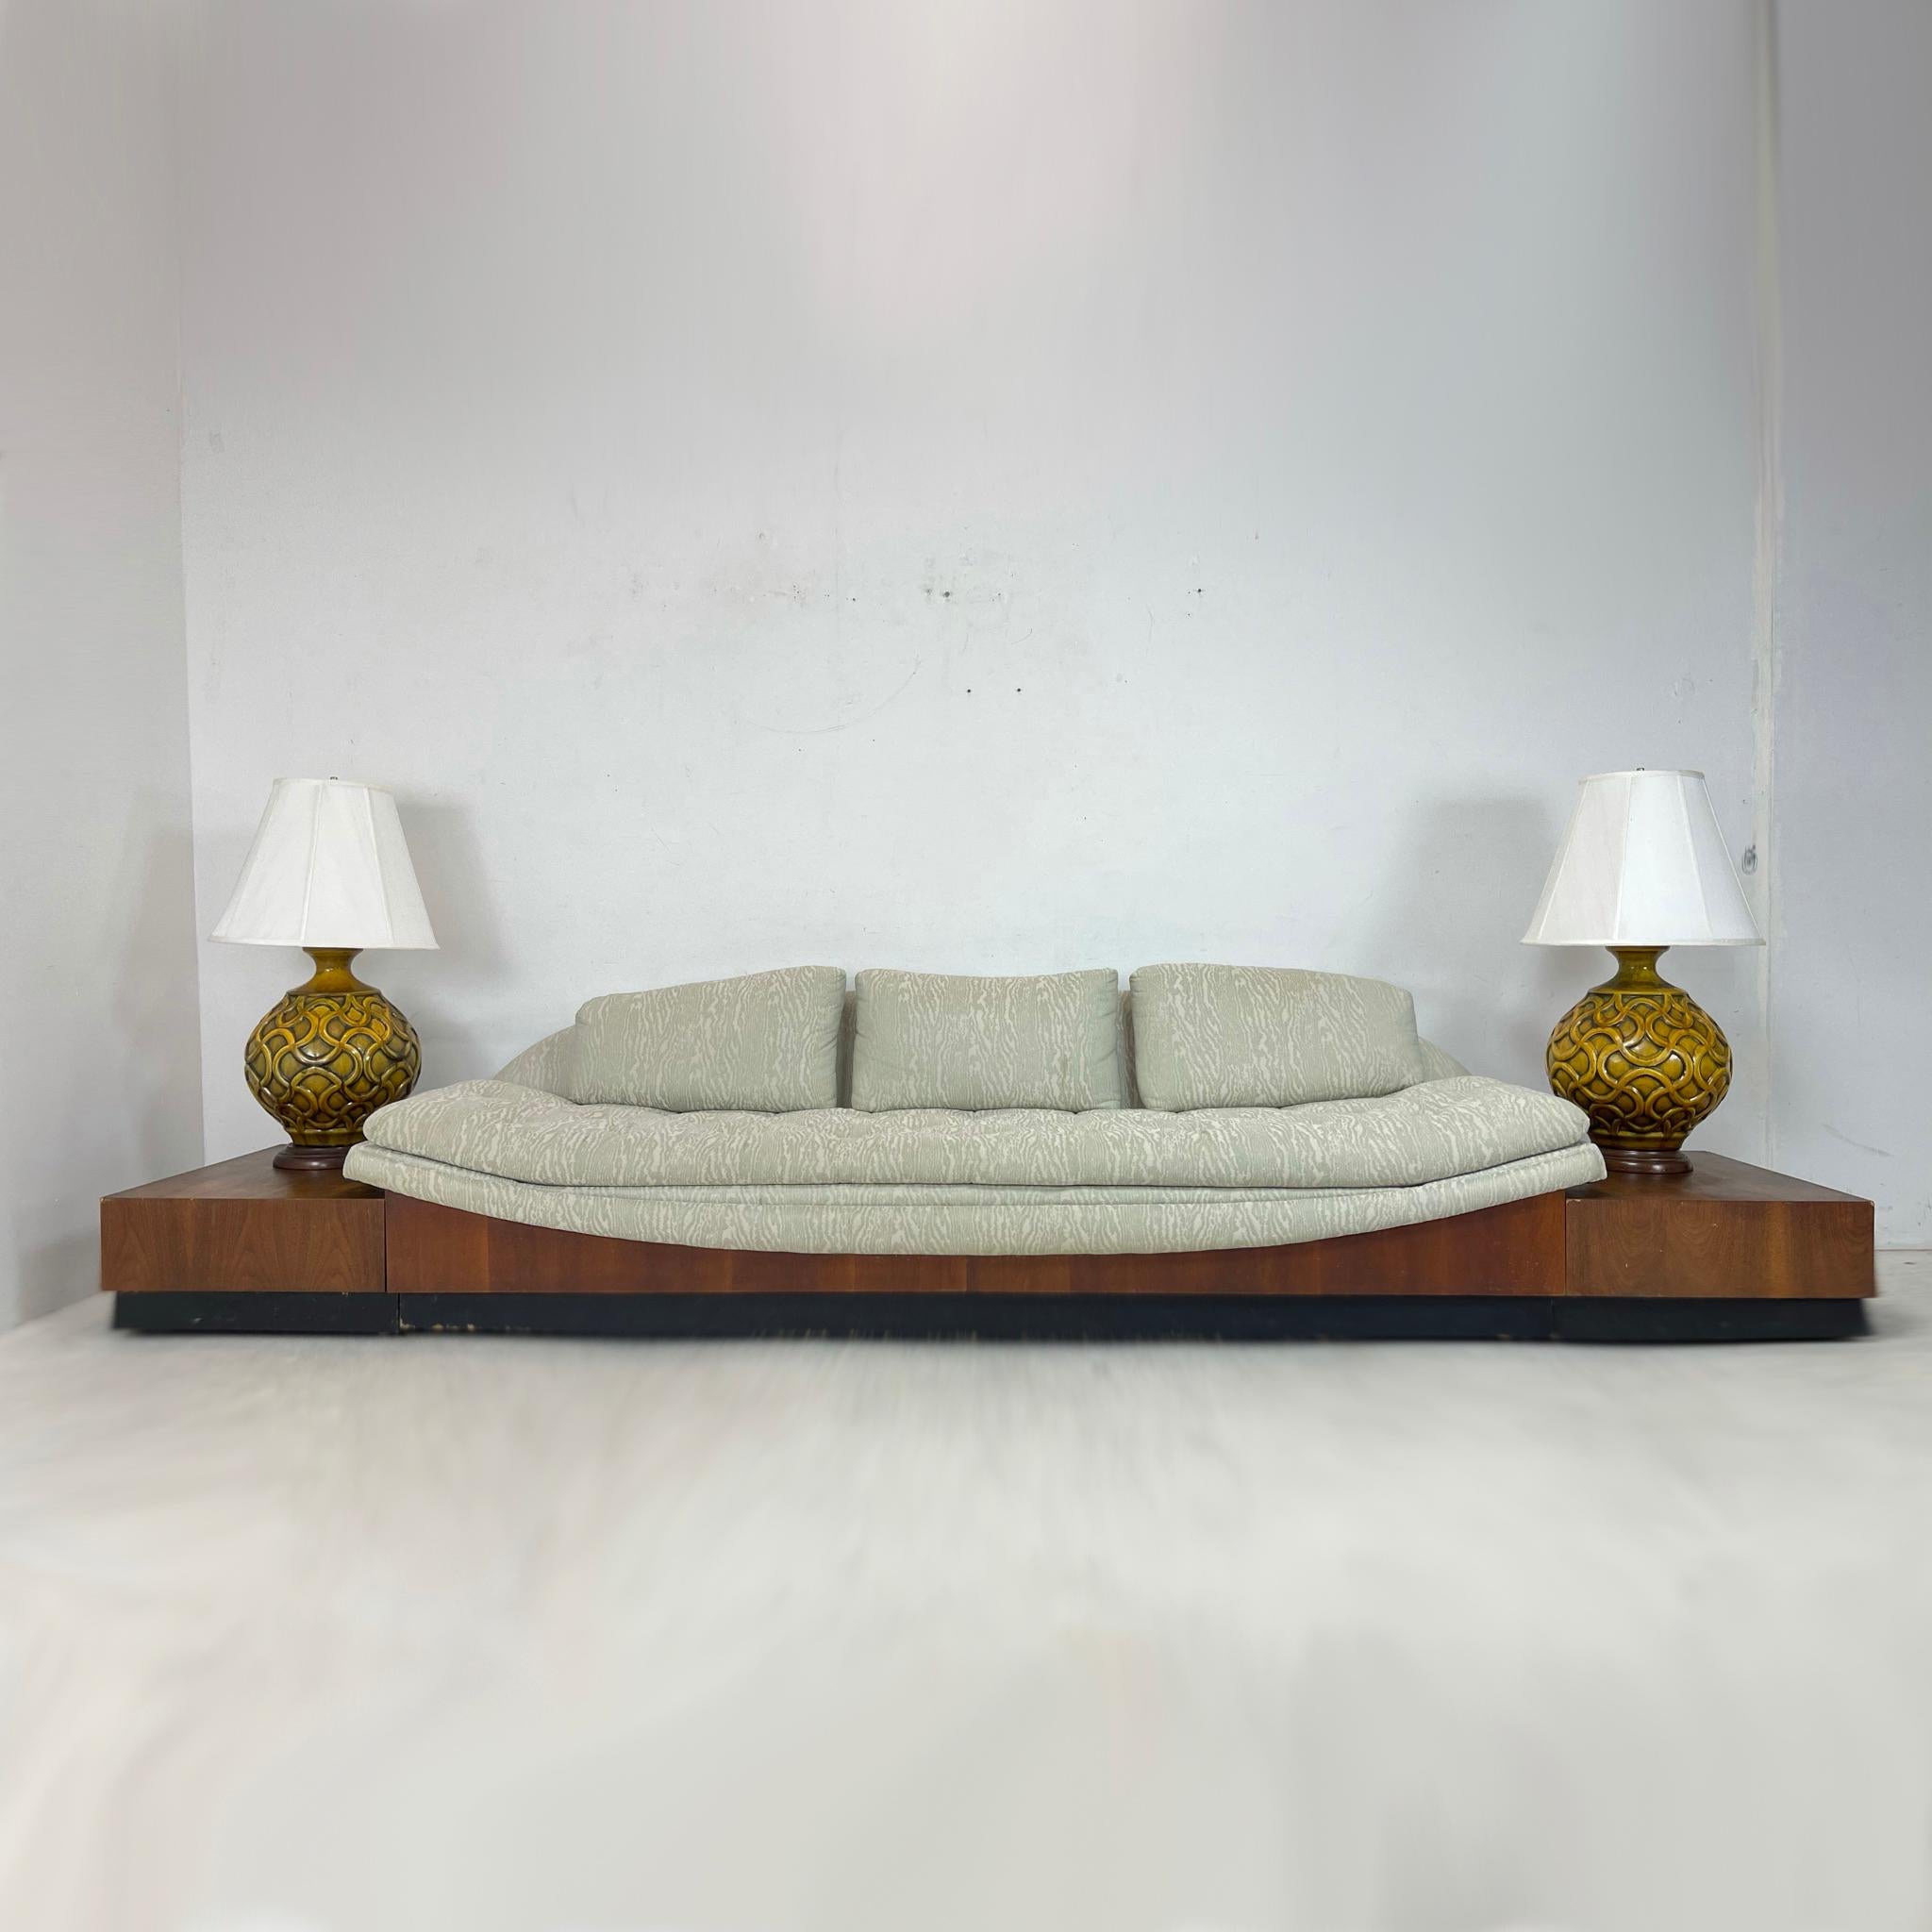 Fantastic Adrian Pearsall Platform Gondola sofa with adjoining side tables. The sofa has an upholstered hammock-curved seat that sits atop a walnut platform base with black plinth. Includes removable walnut platform side tables. The sofa is sturdy